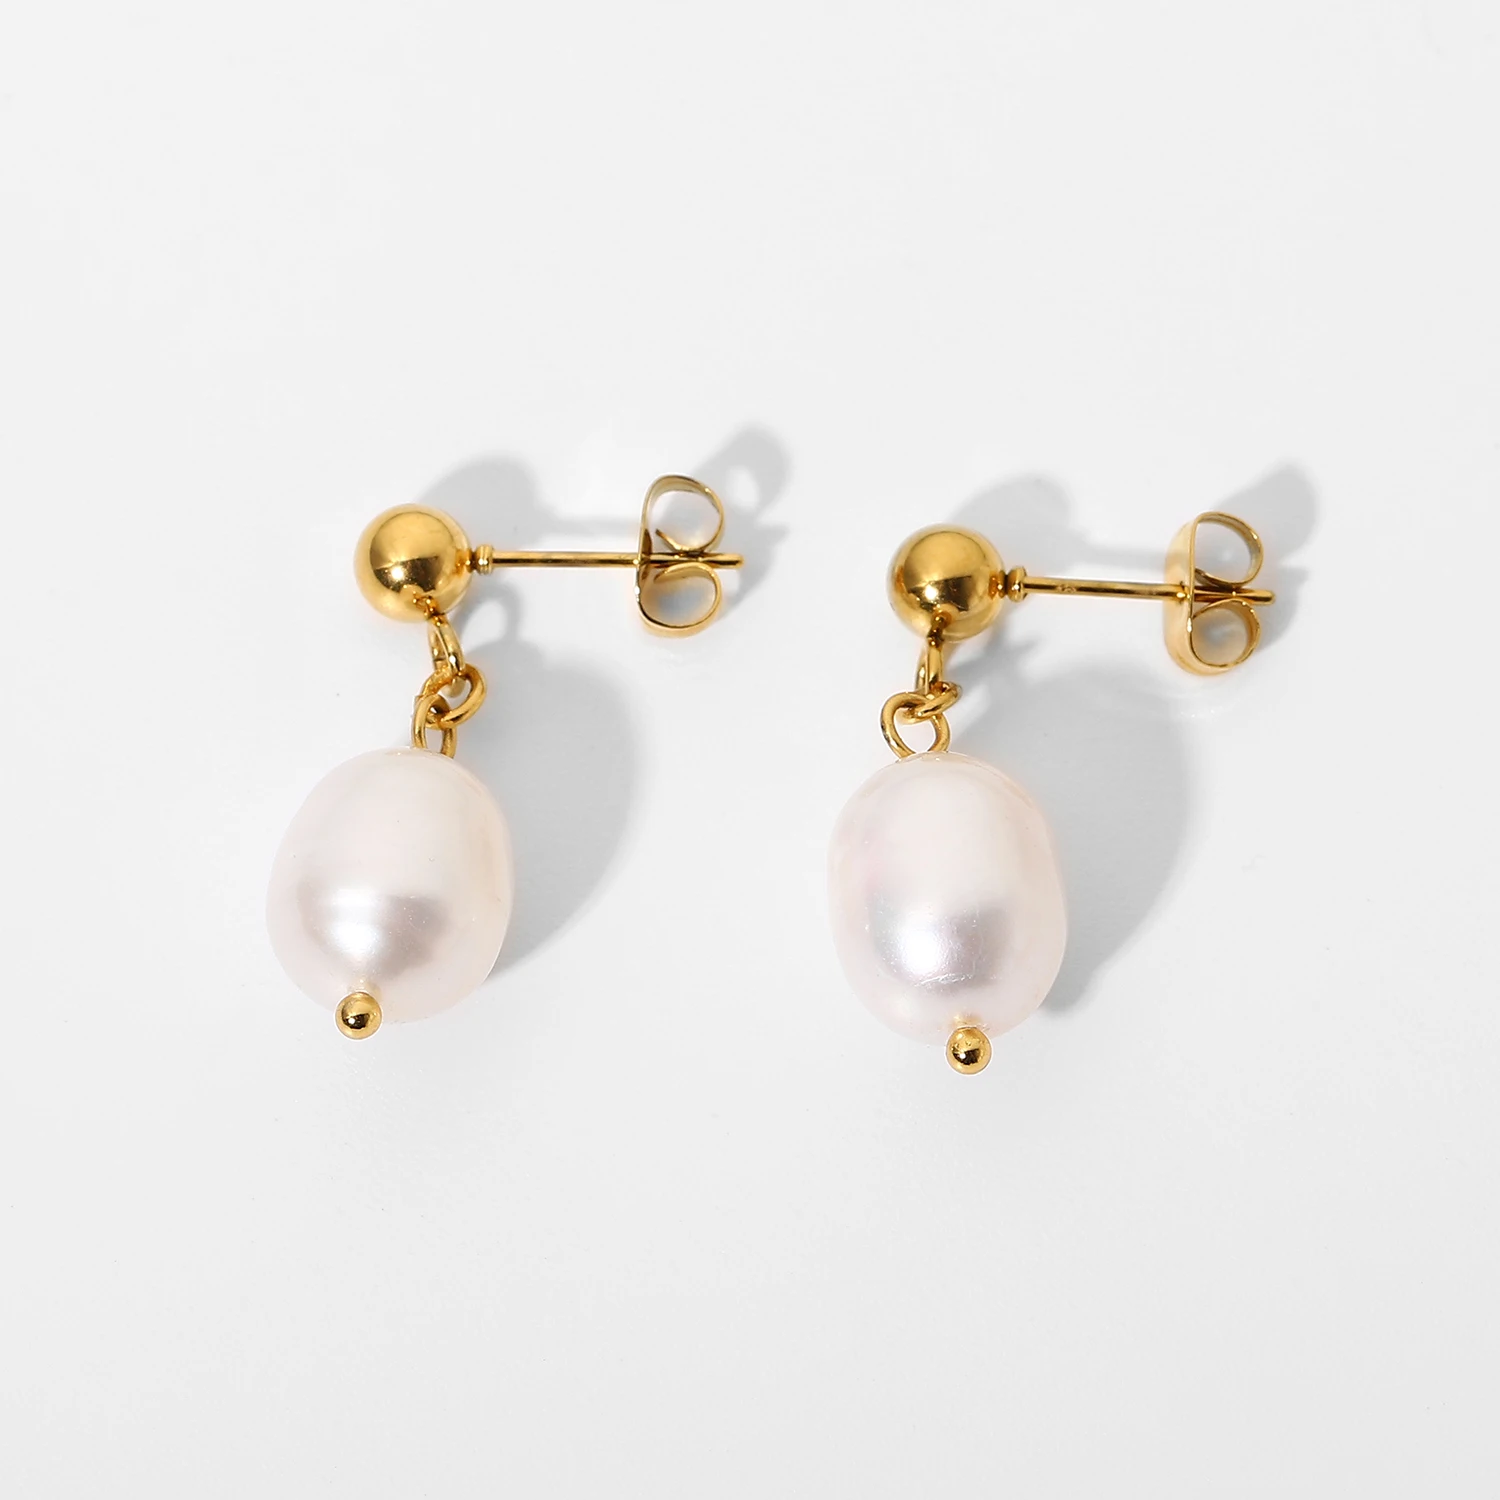 14 K Yellow Gold 5-6 mm White Button Fresh Water Cultured Pearl Post Earring  XF610 | Silver City Sarasota